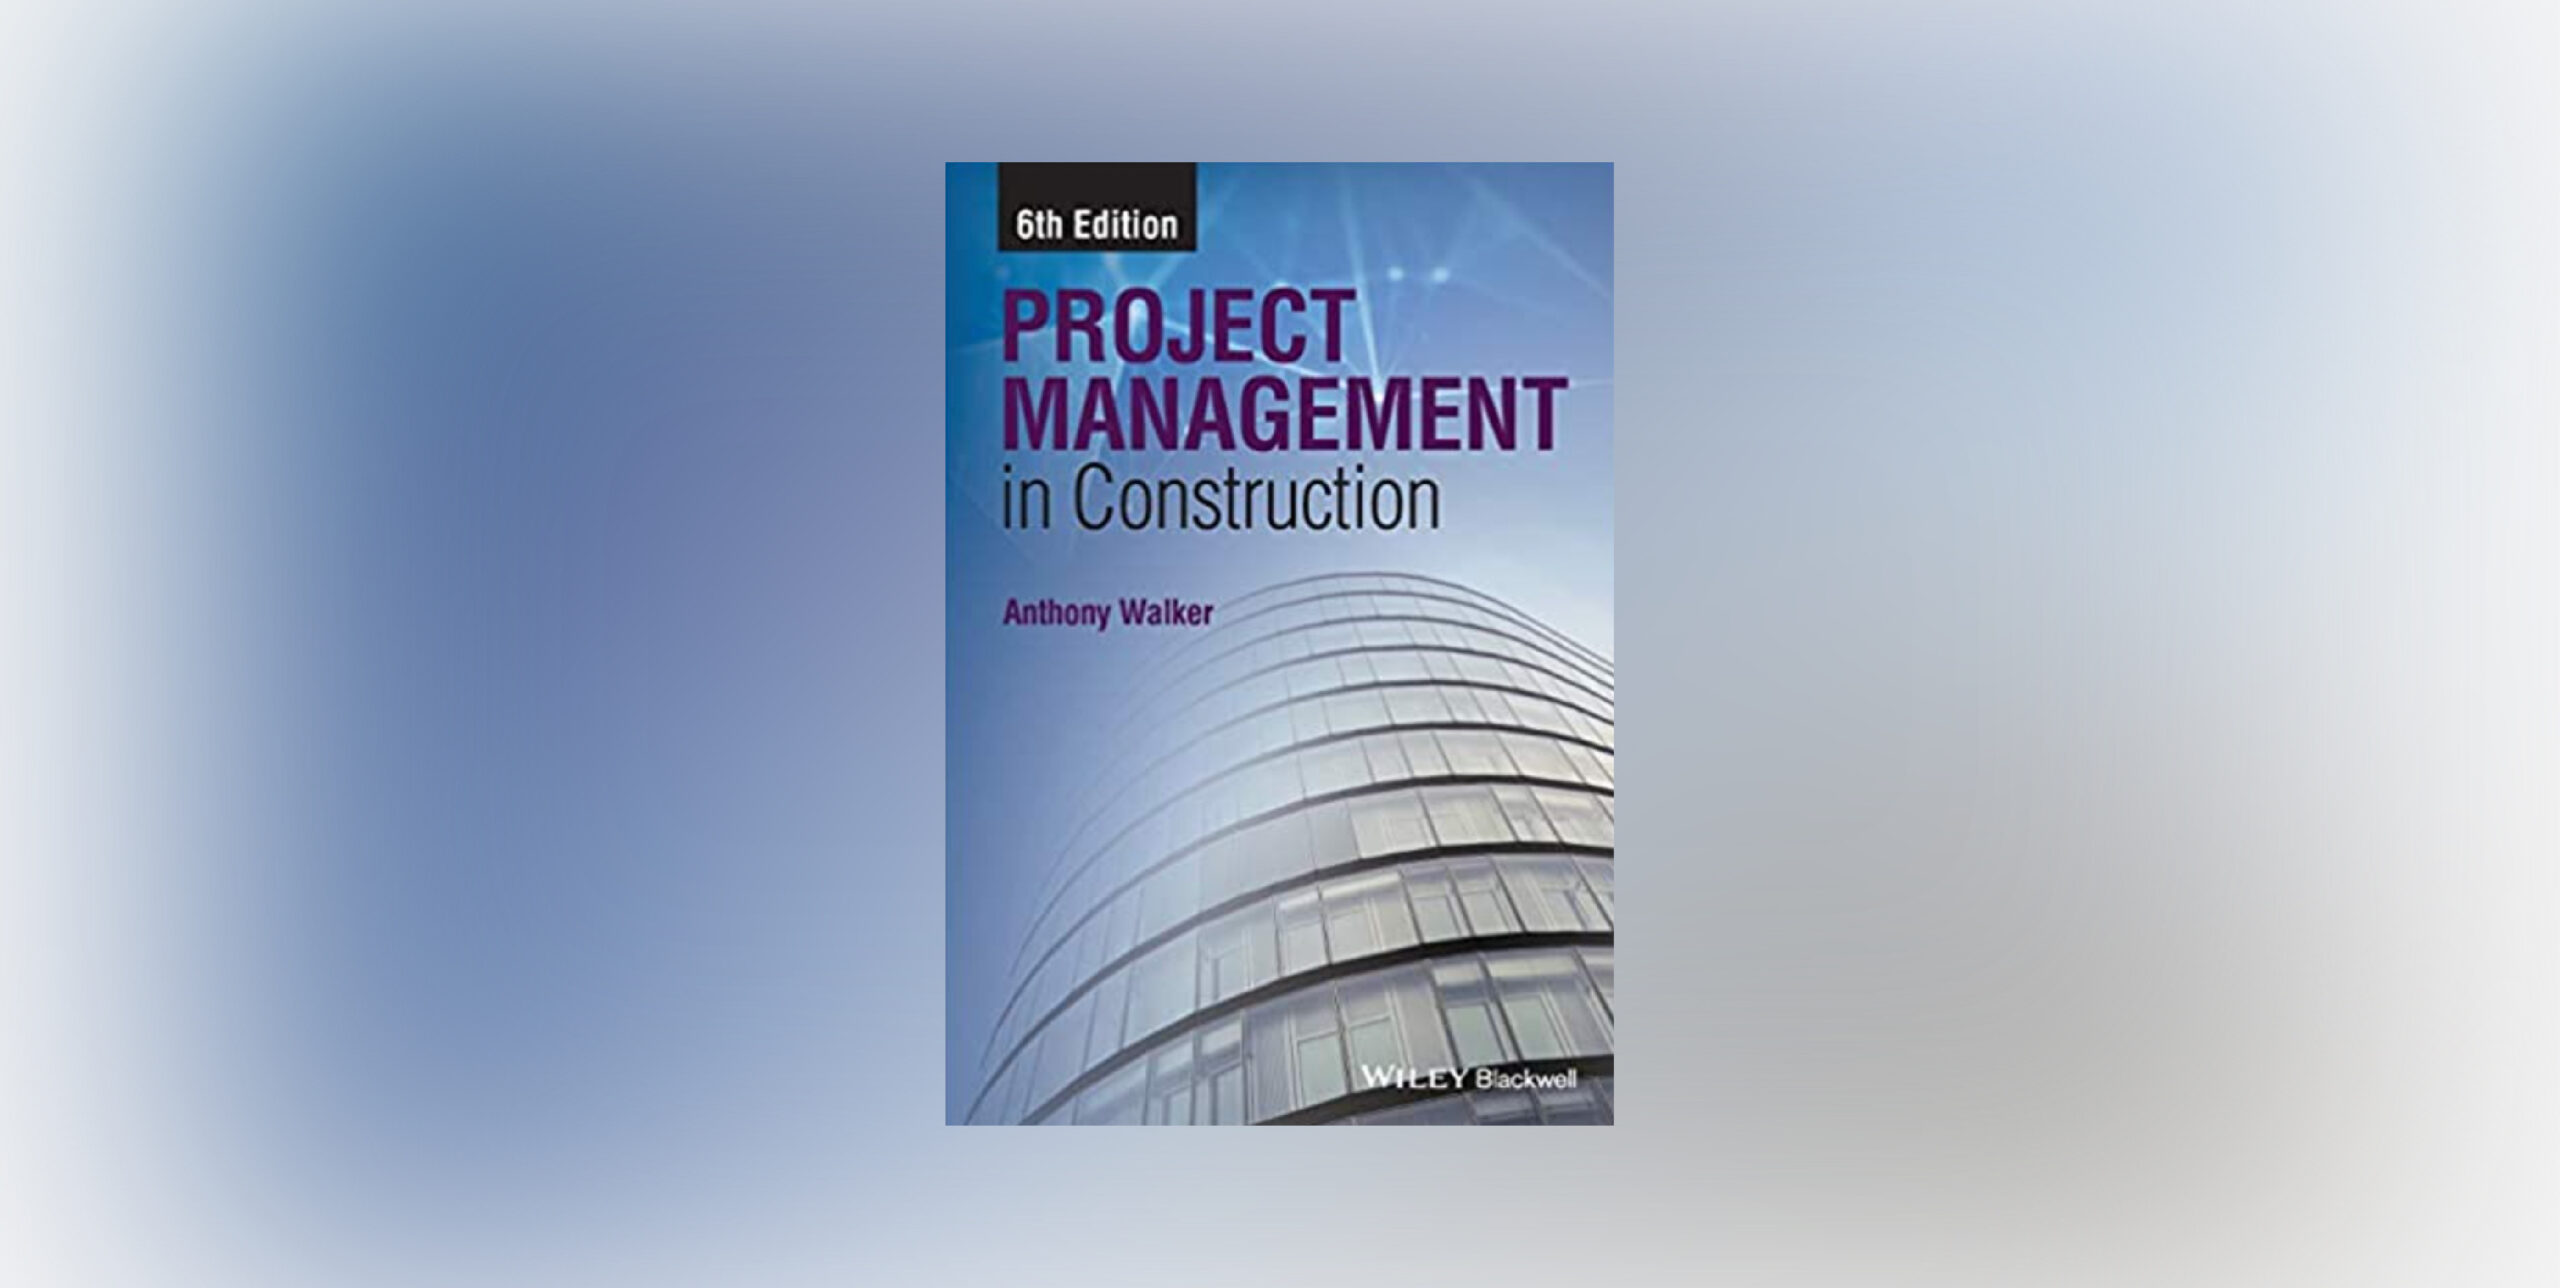 Project manager by anthony walker on blue background